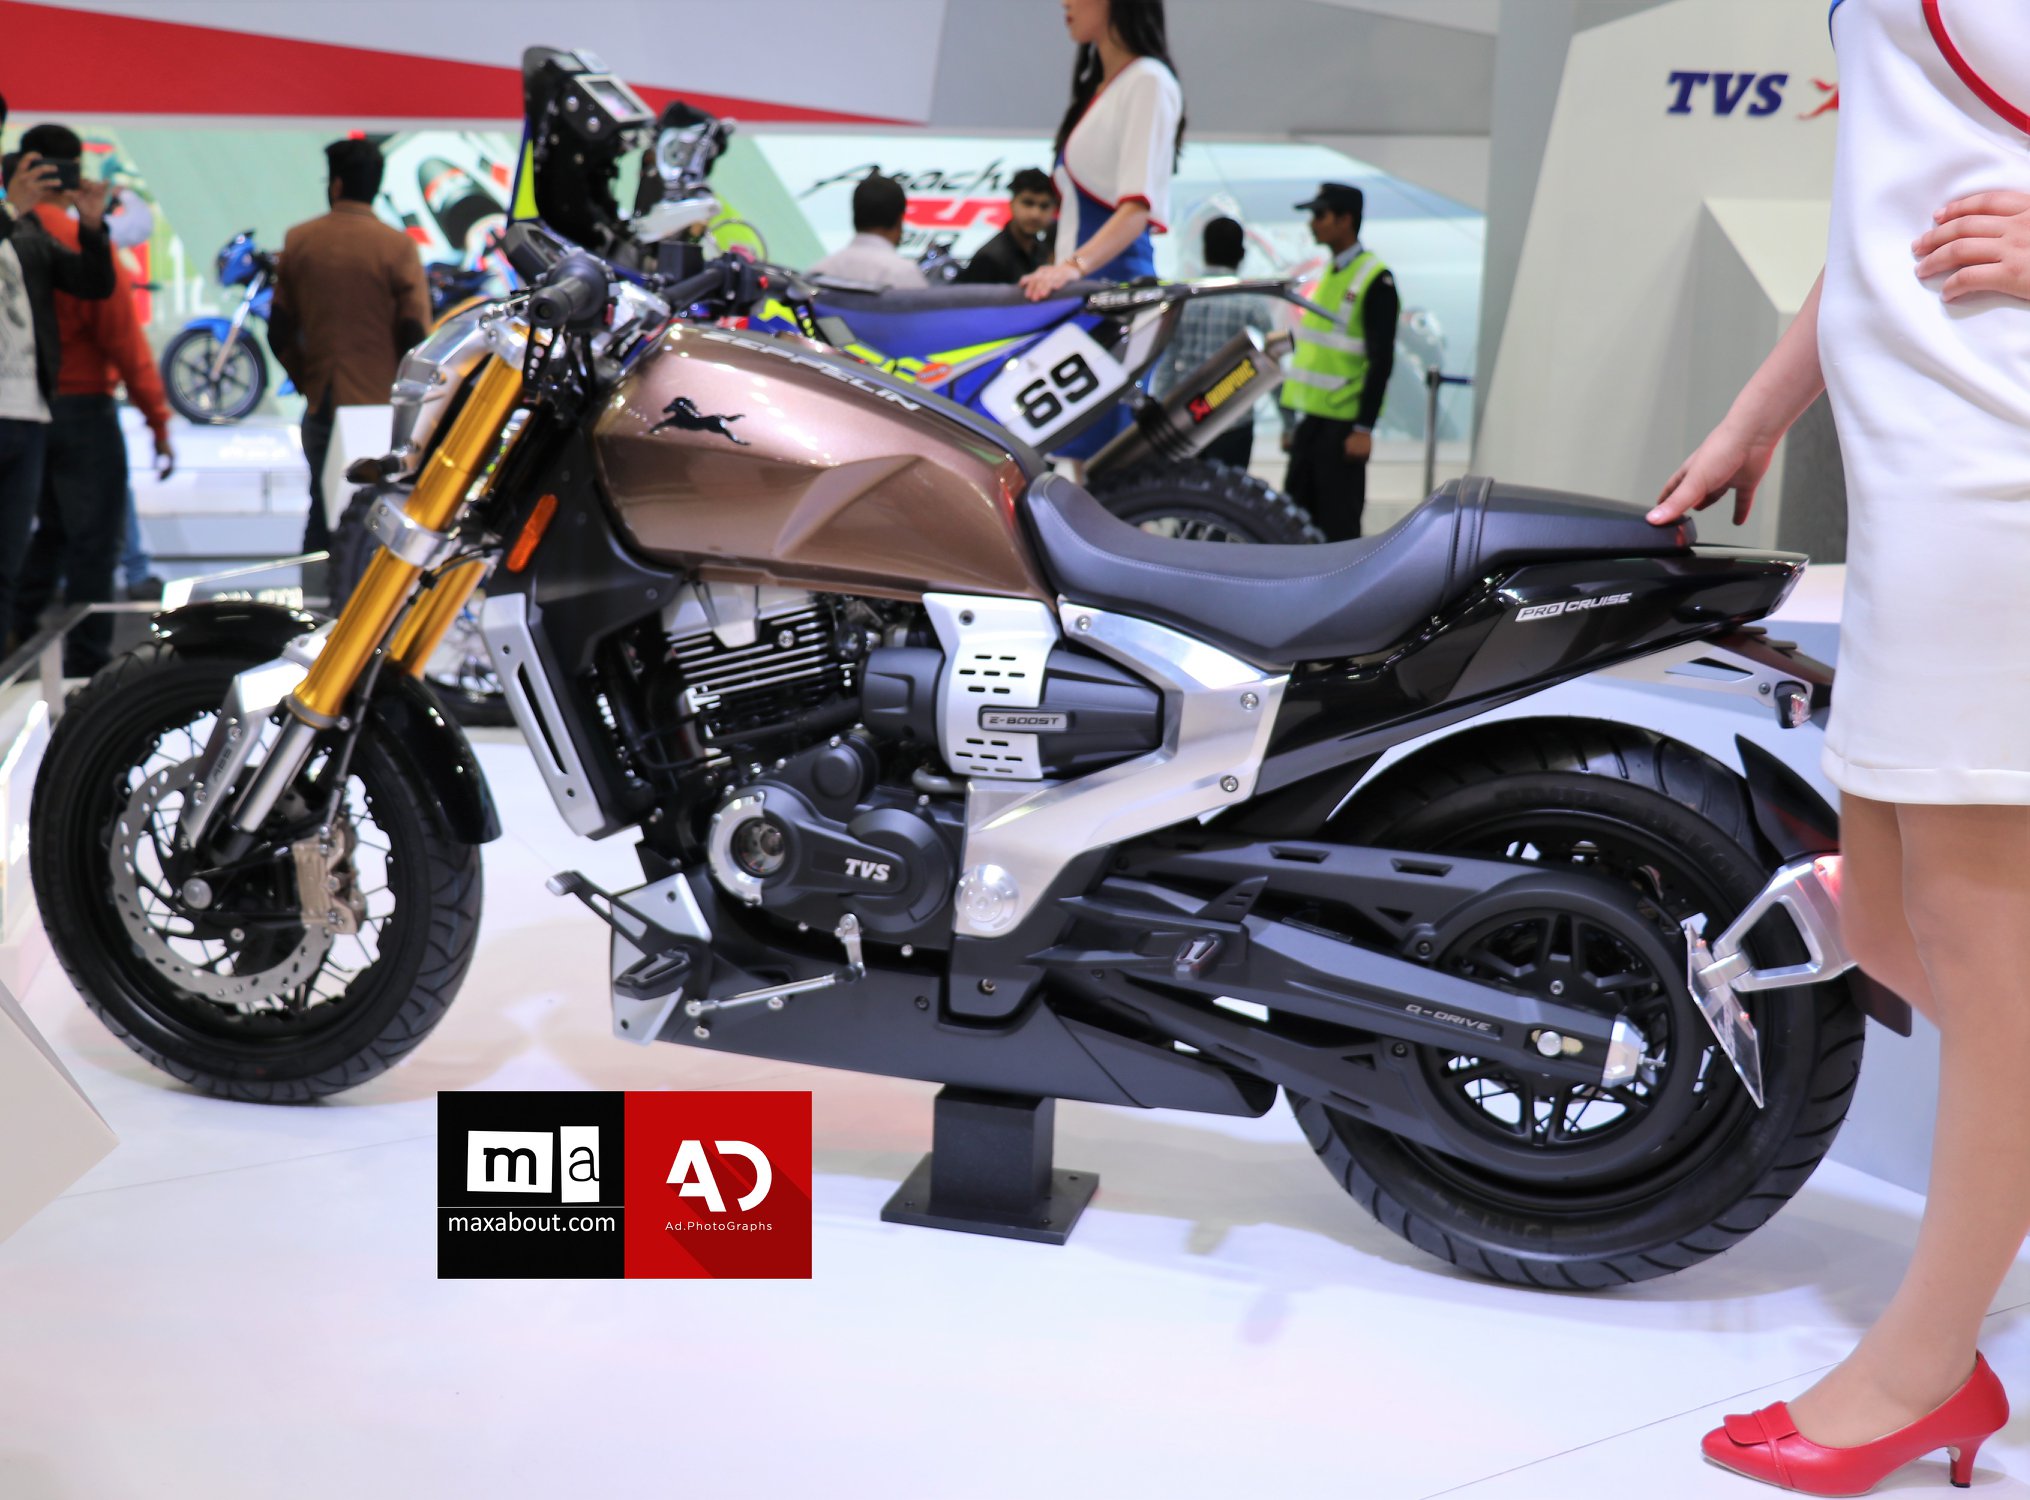 5 Quick Facts About the Upcoming TVS Cruiser Motorcycle - closeup